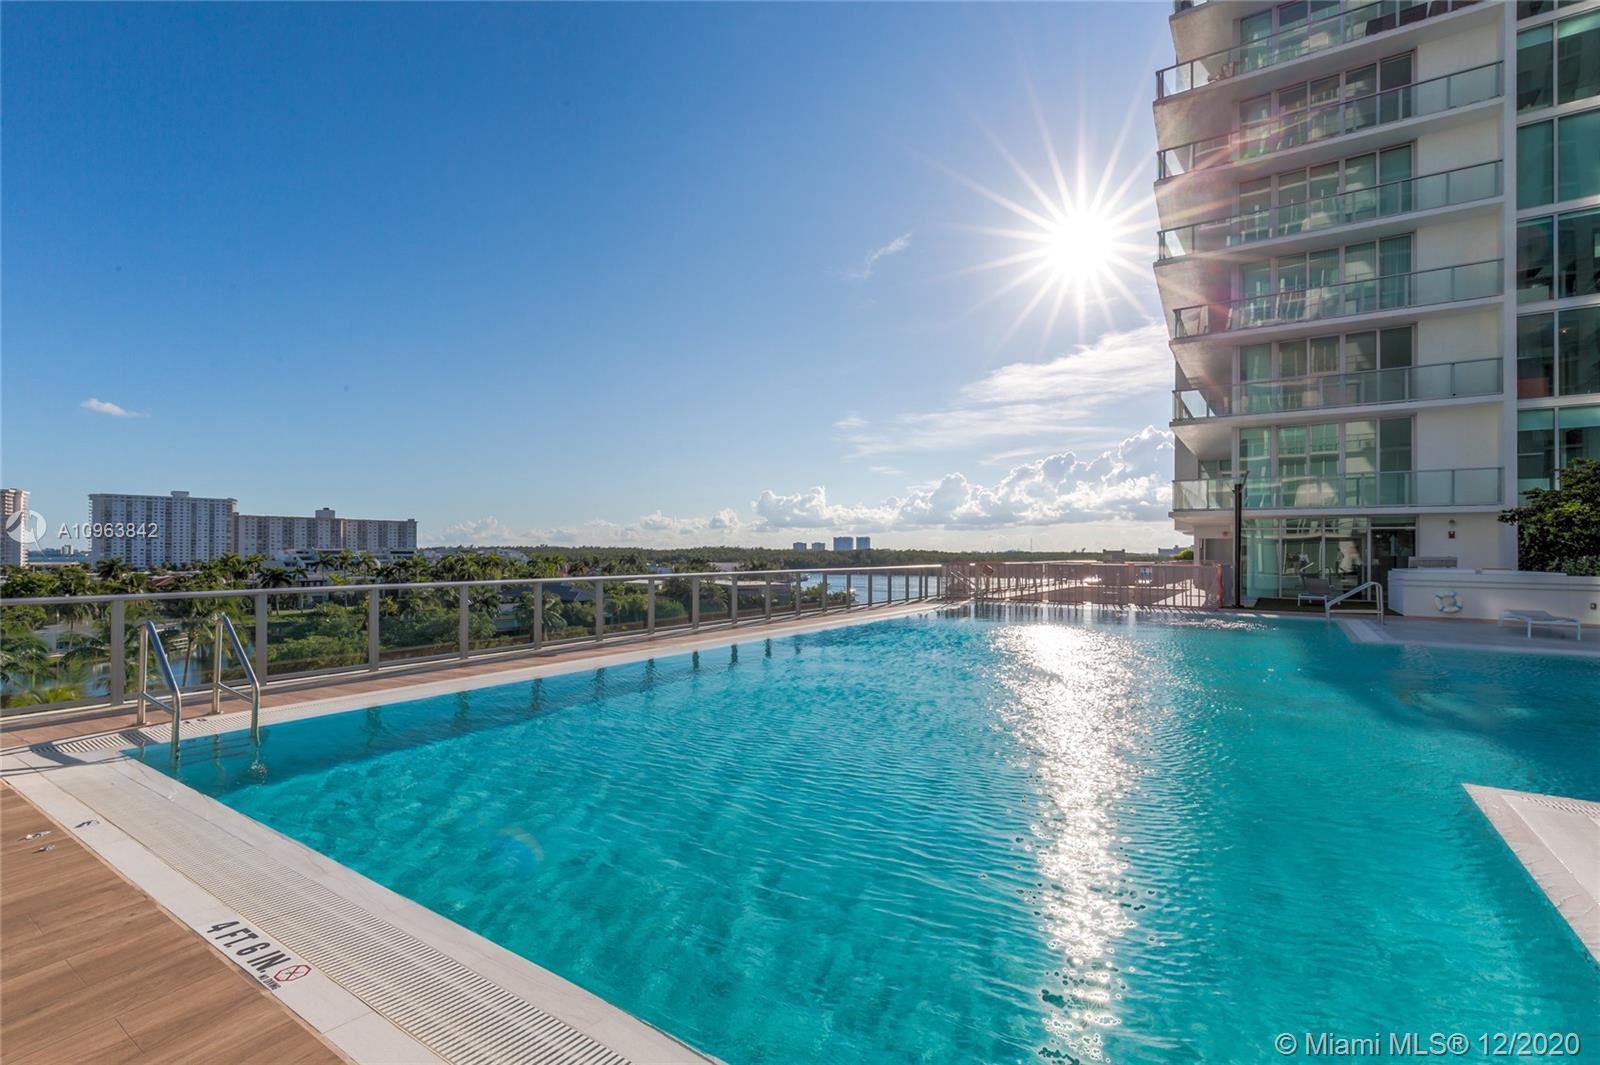 Photo 35 of Parque Towers E Apt 1002 in Sunny Isles Beach - MLS A10963842